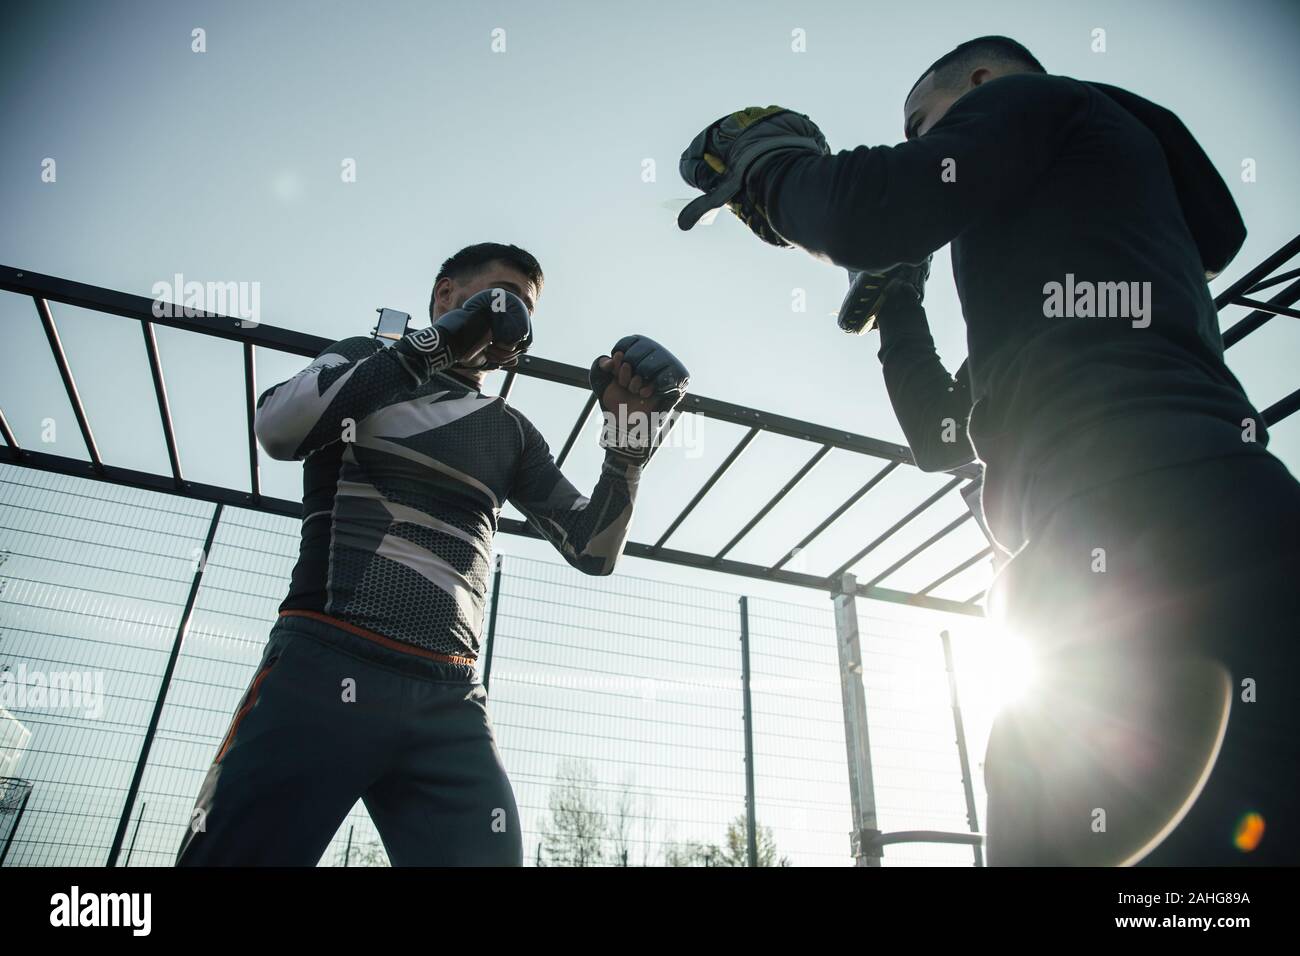 Laconic image of two men performing boxing stances outdoors Stock Photo